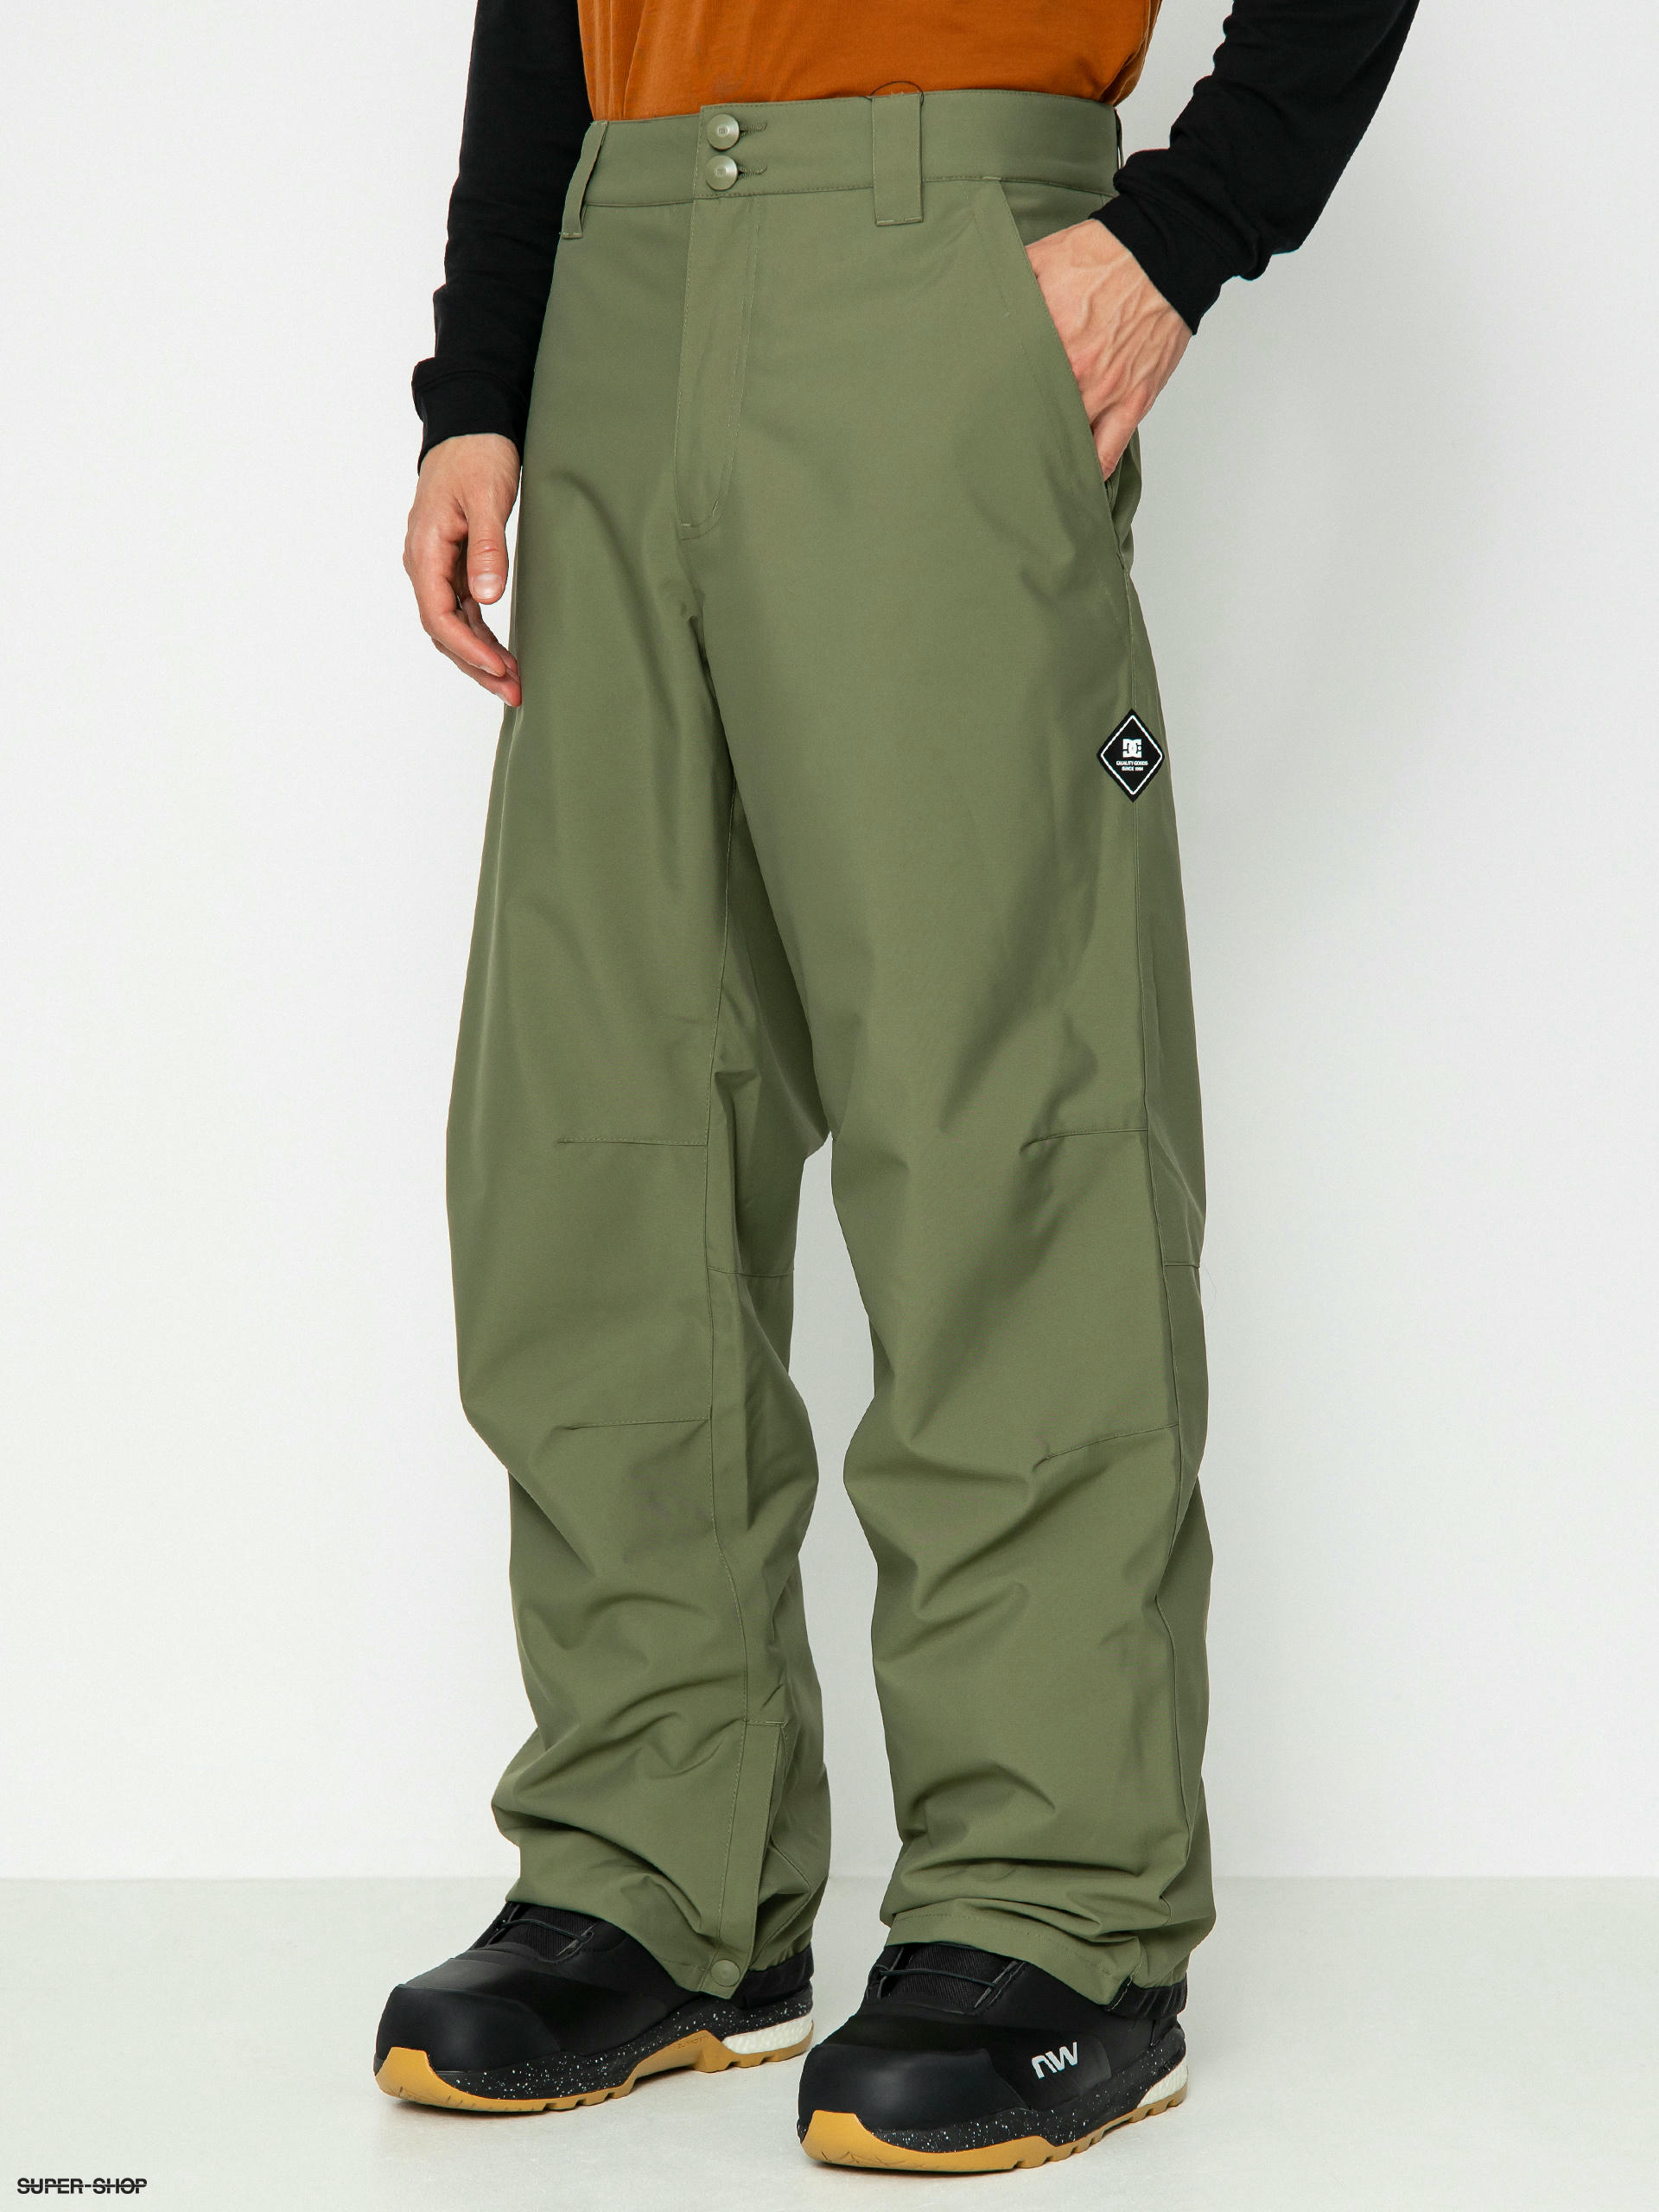 Dc Snow Chino - Technical Snow Pants for Men